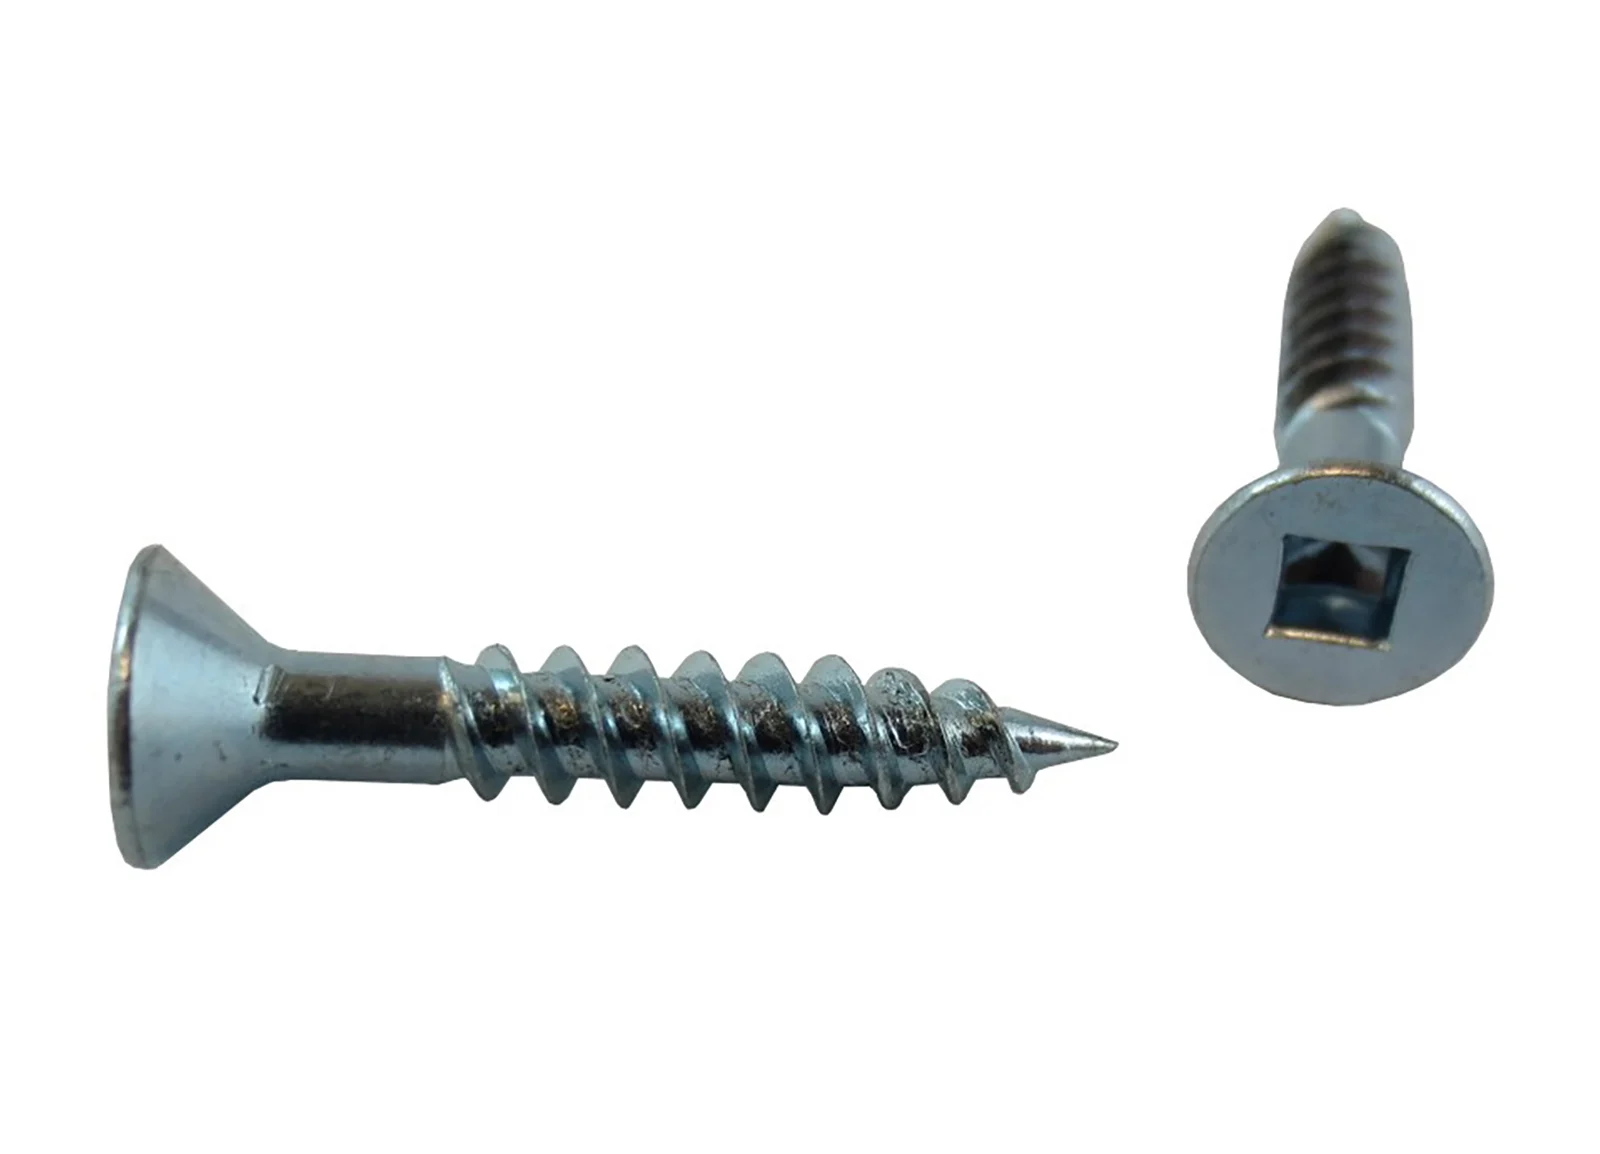 Here's How to Choose the Best Screw for Your Project